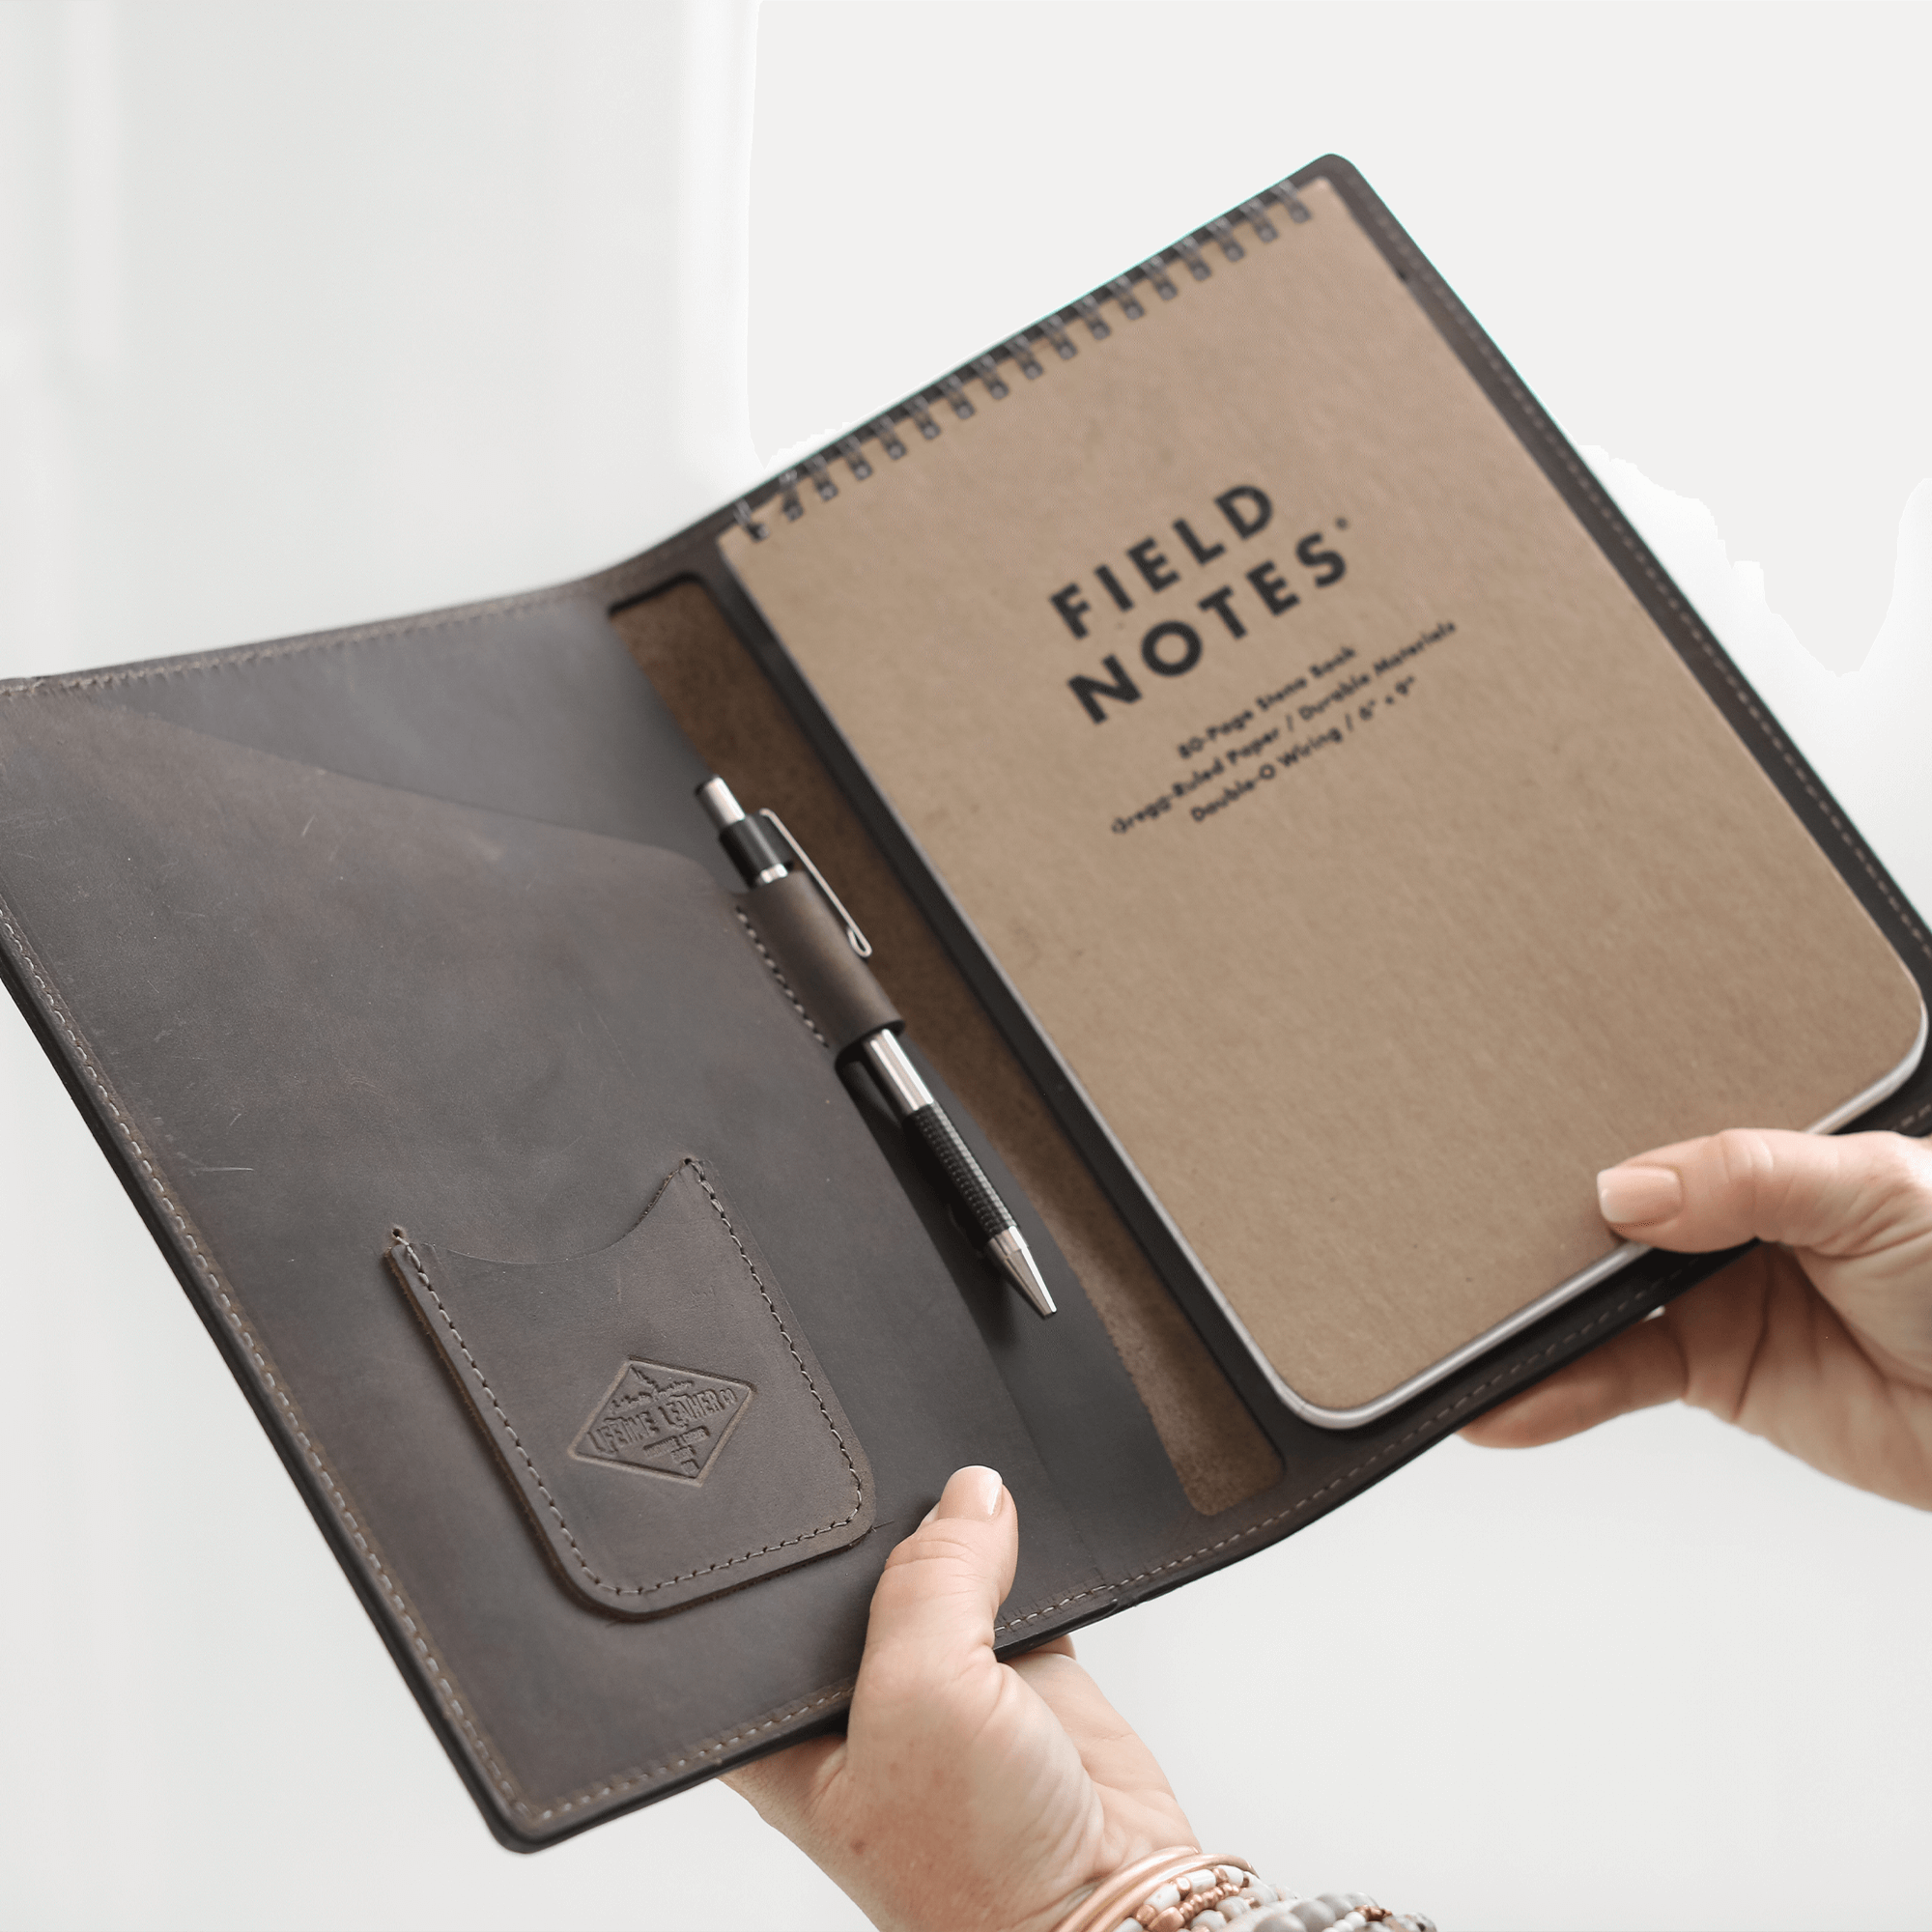  Leather Steno Pad by Lifetime Leather Co Lifetime Leather Co Perfumarie